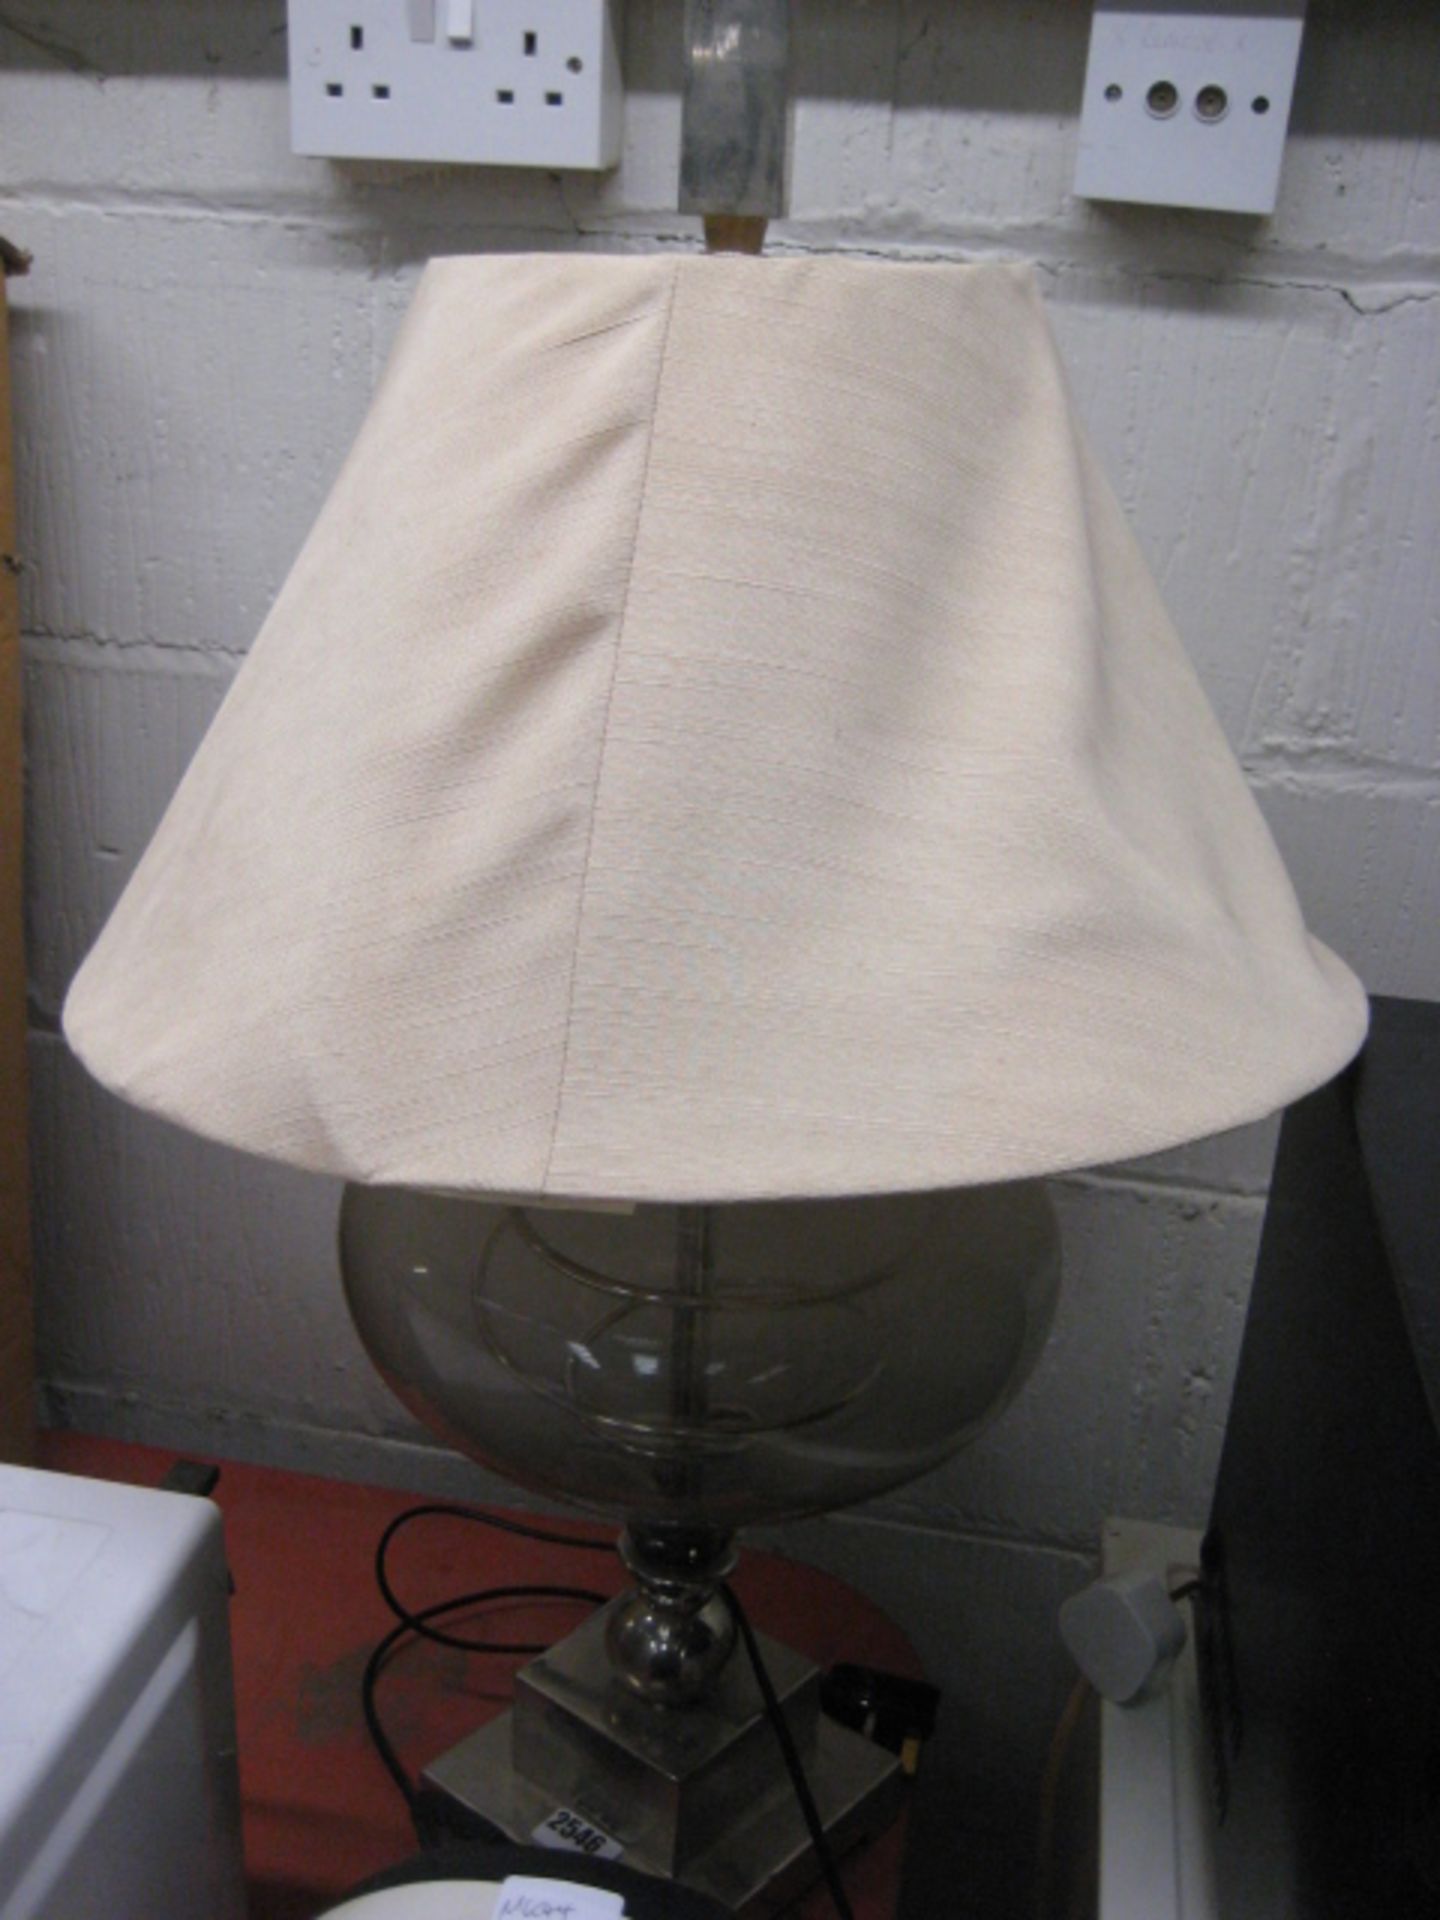 (25) Table lamp with cream shade